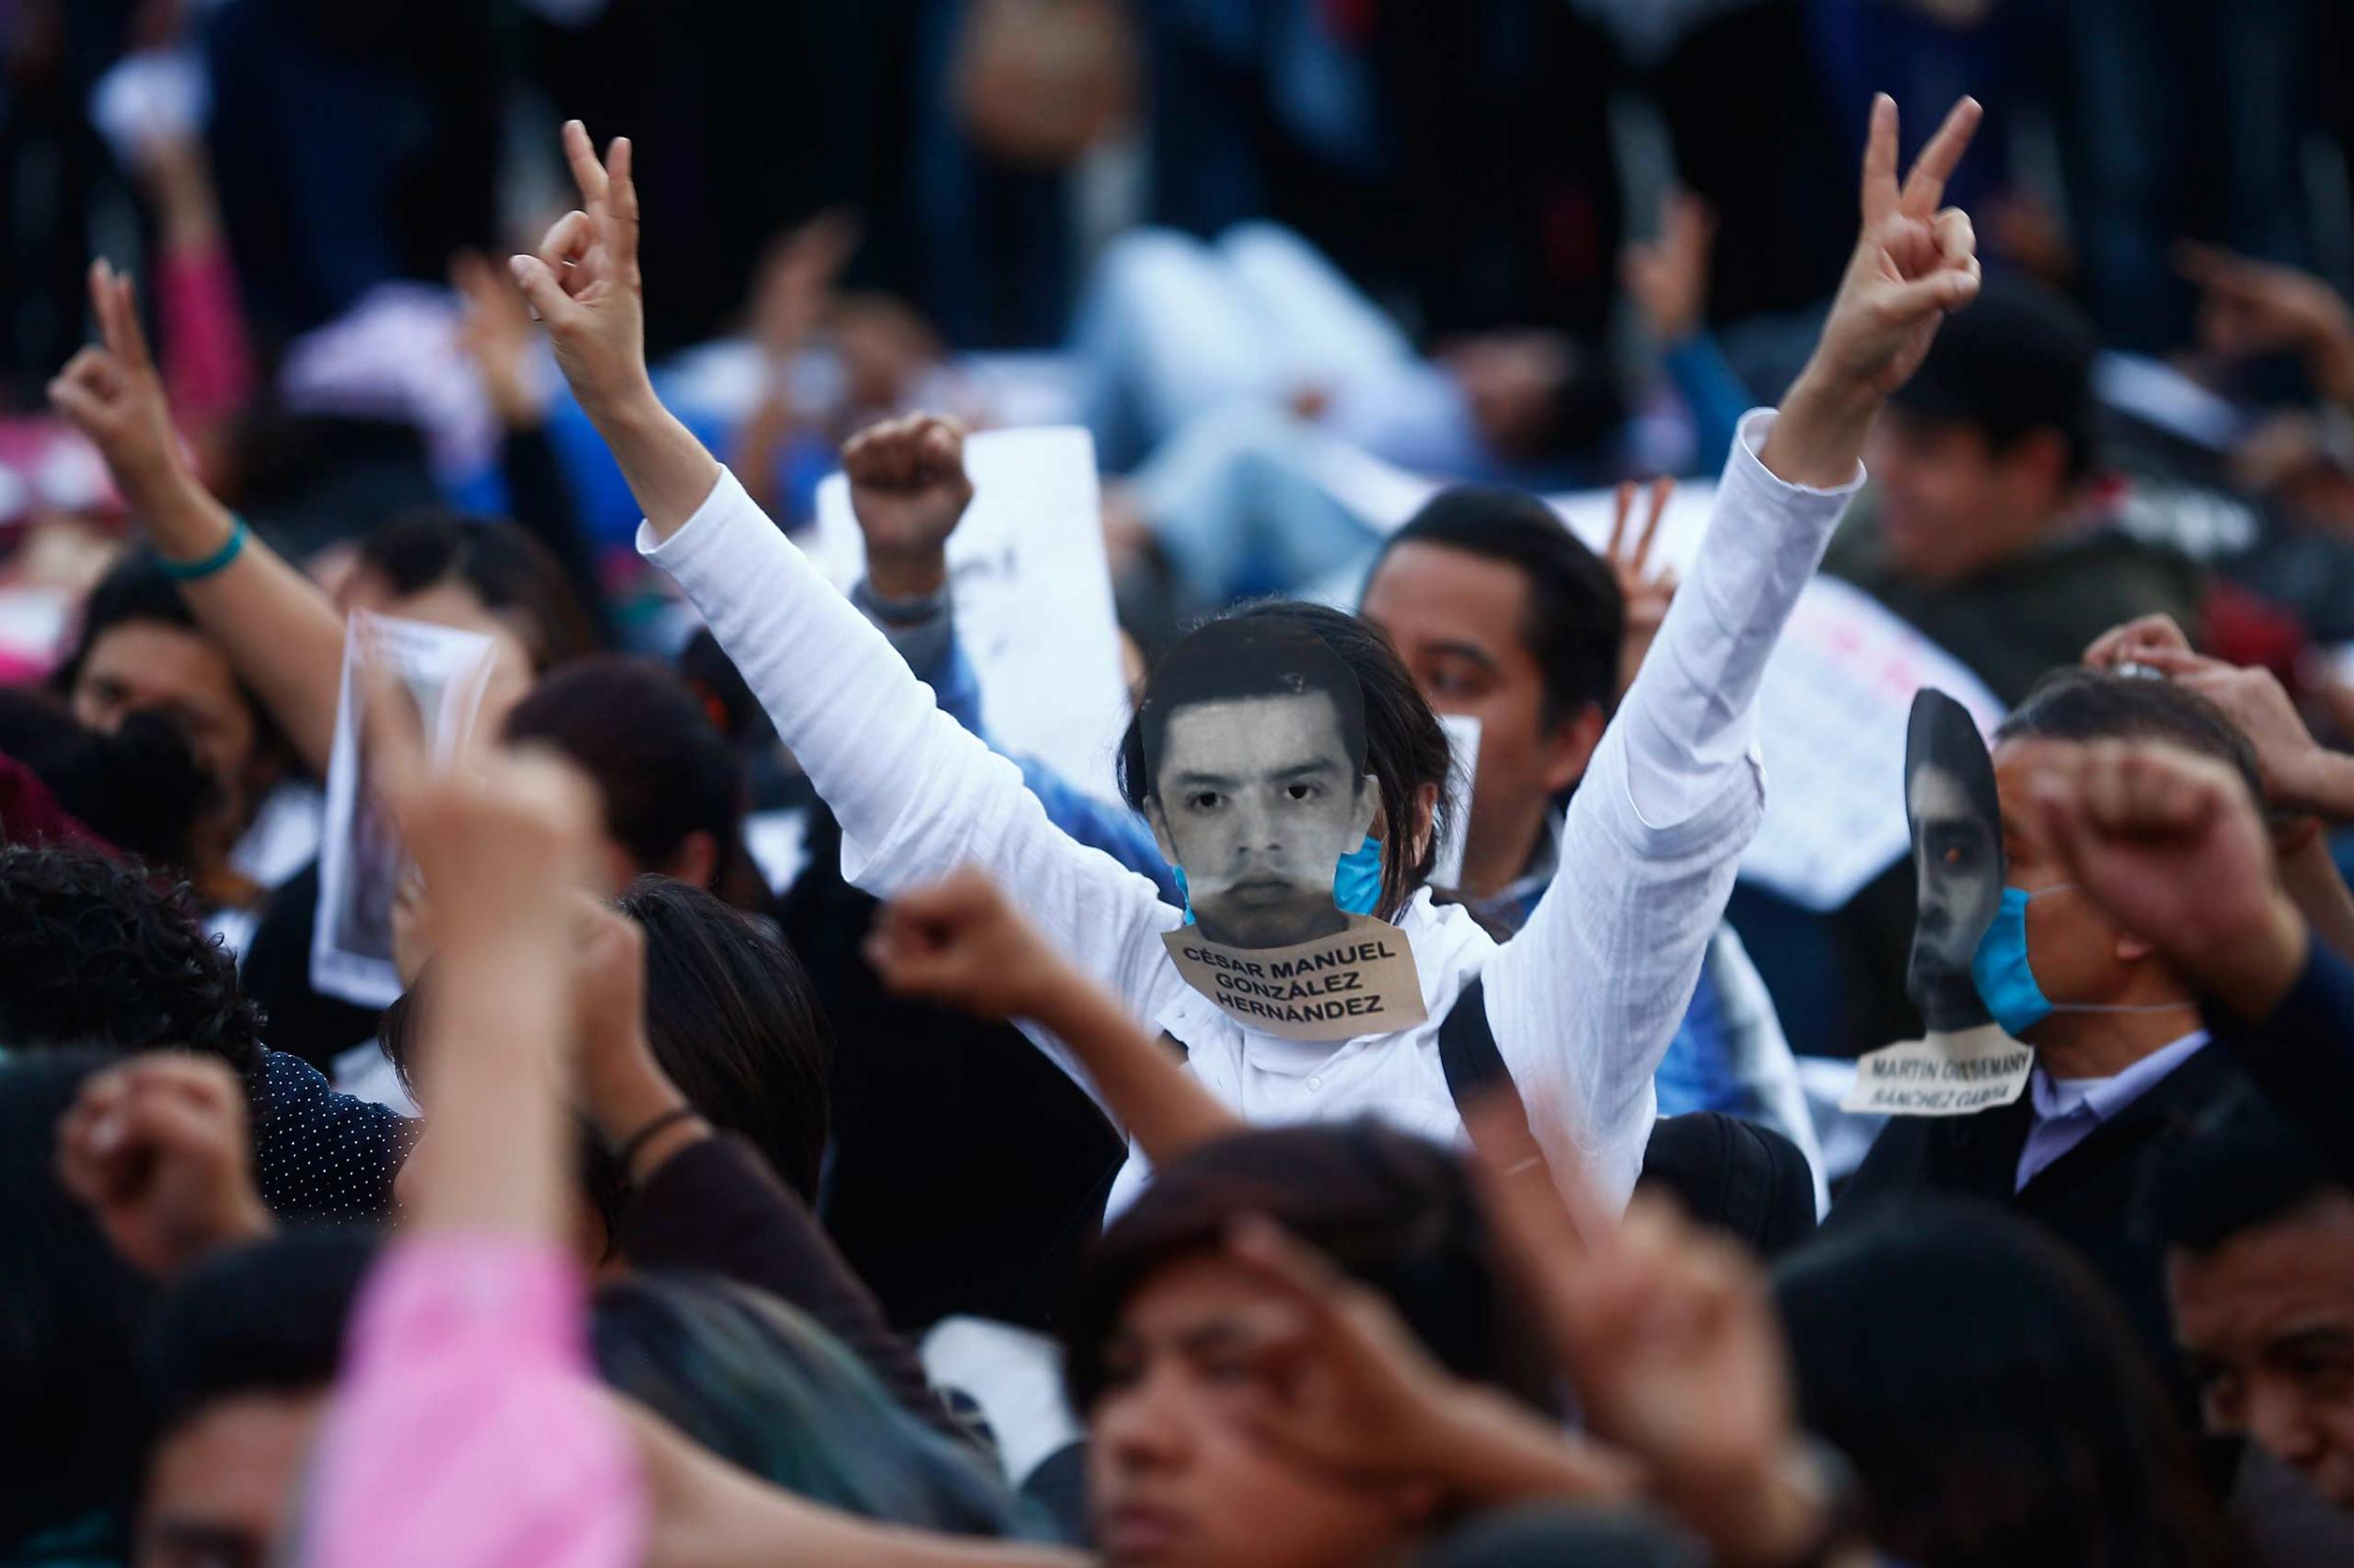 Demonstrator whose face is covered with a picture of a missing student gestures during a protest in support of the missing Ayotzinapa Teacher Training College Raul Isidro Burgos students at Zocalo square in Mexico City